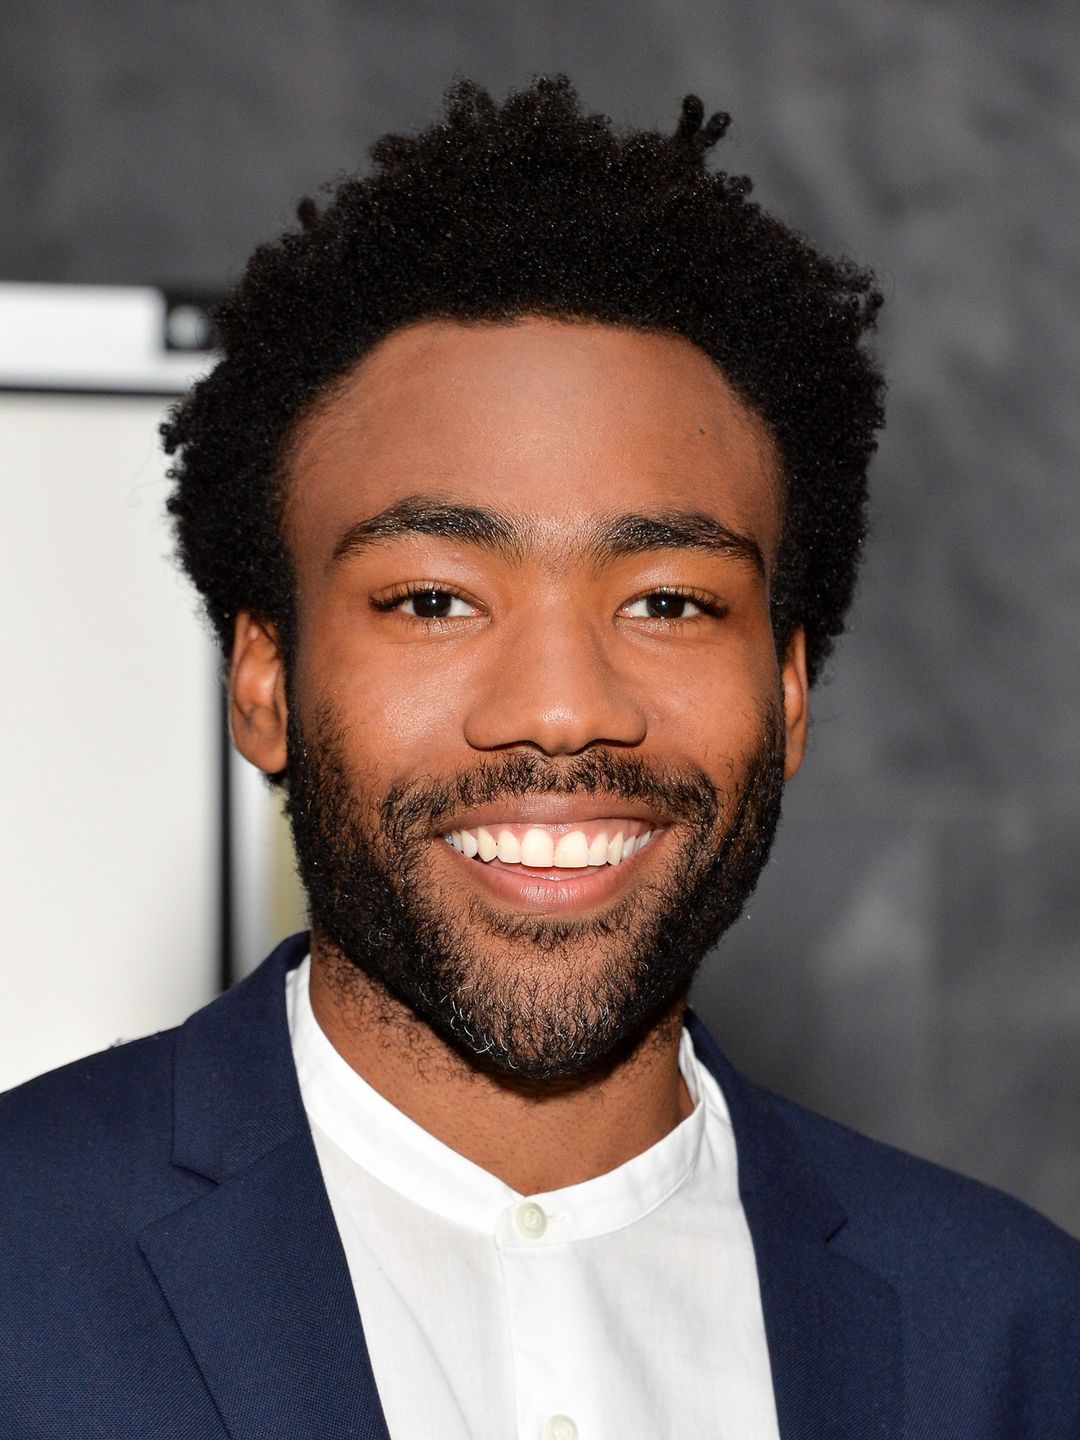 Donald Glover date of birth